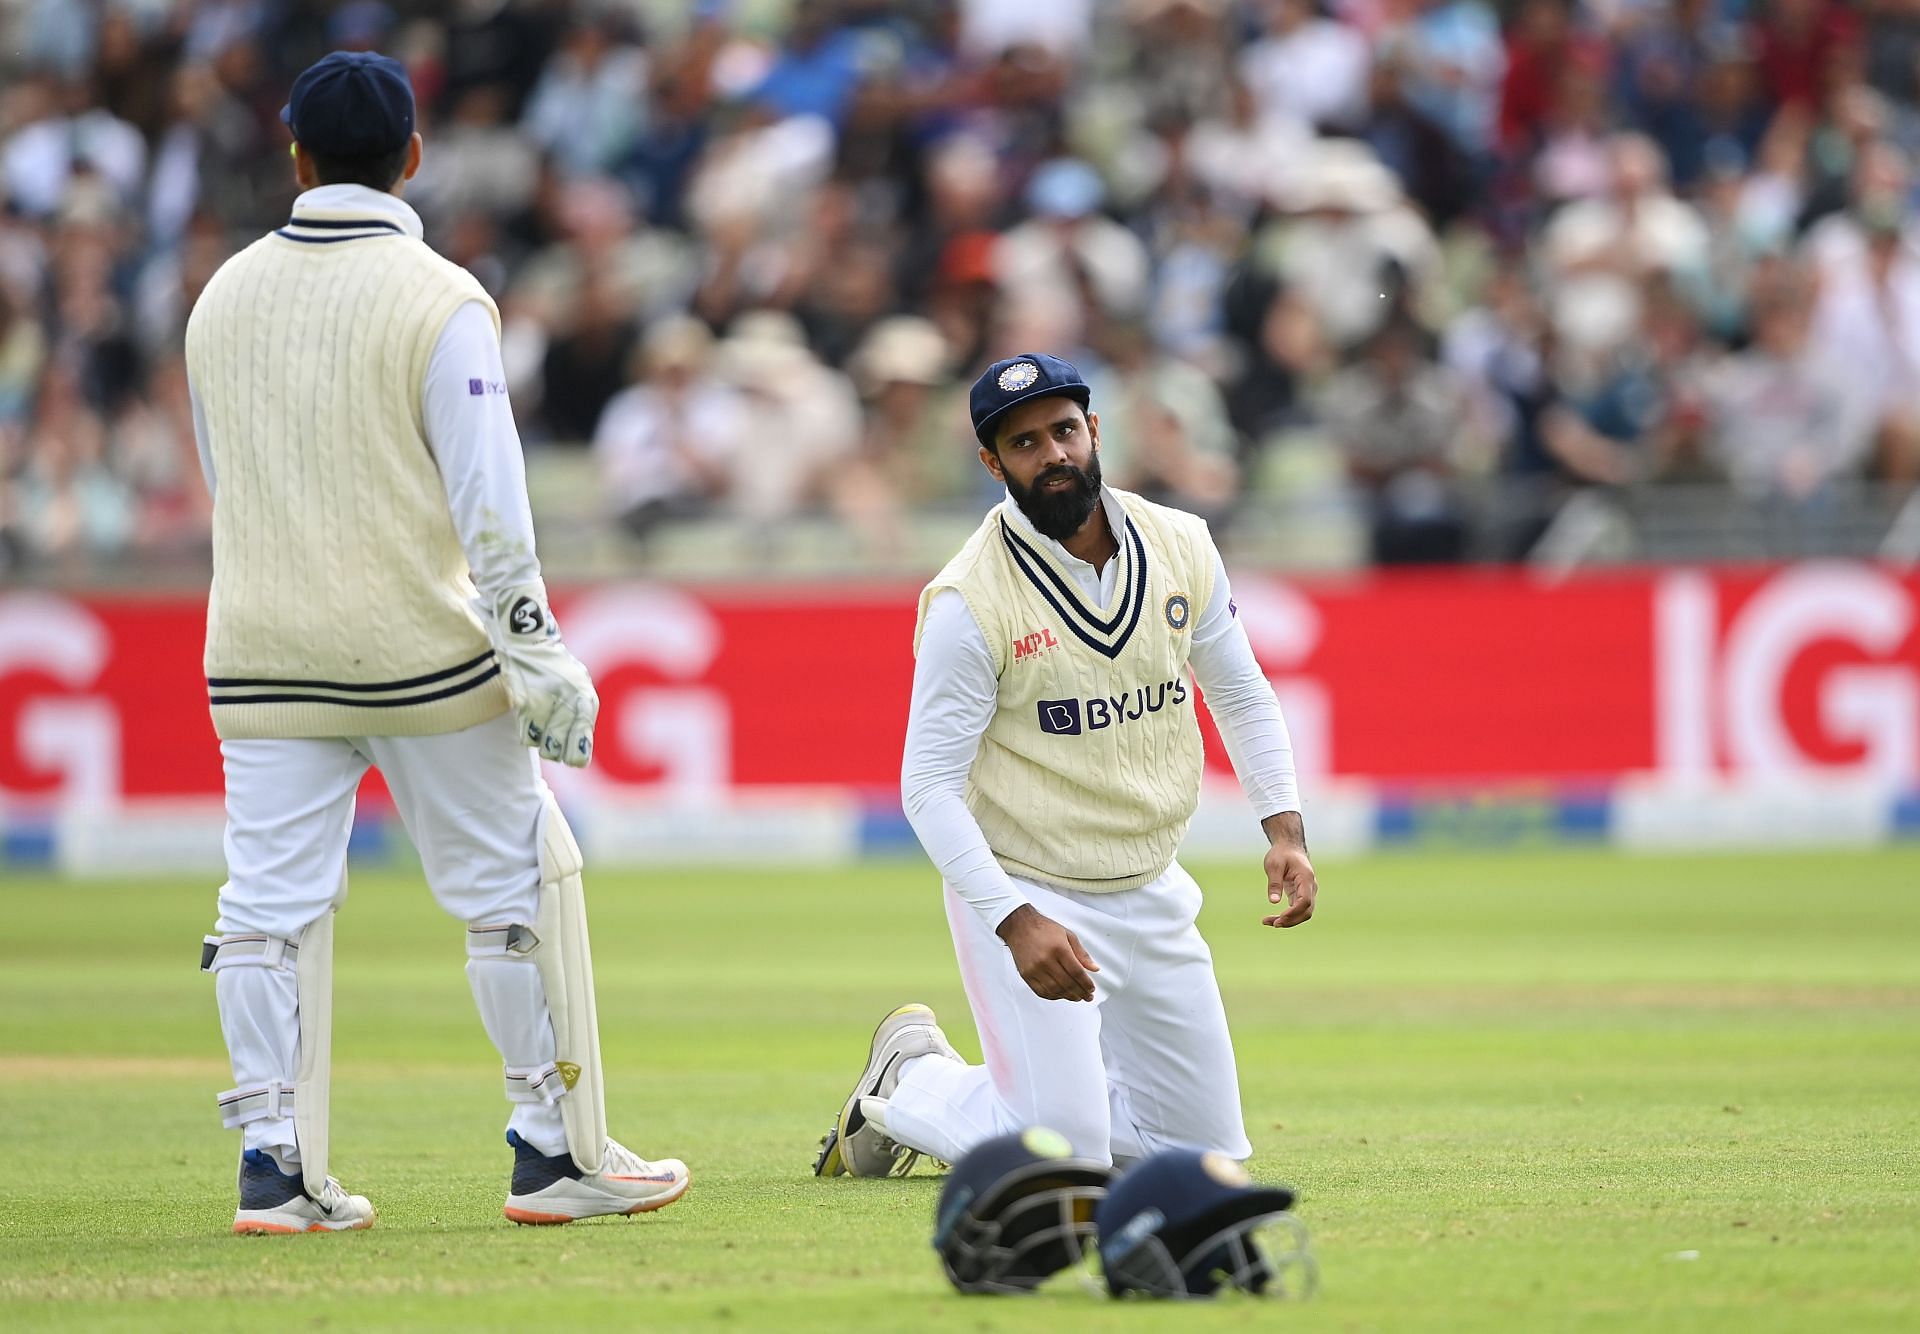 England v India - Fifth LV= Insurance Test Match: Day Four (Image: Getty)